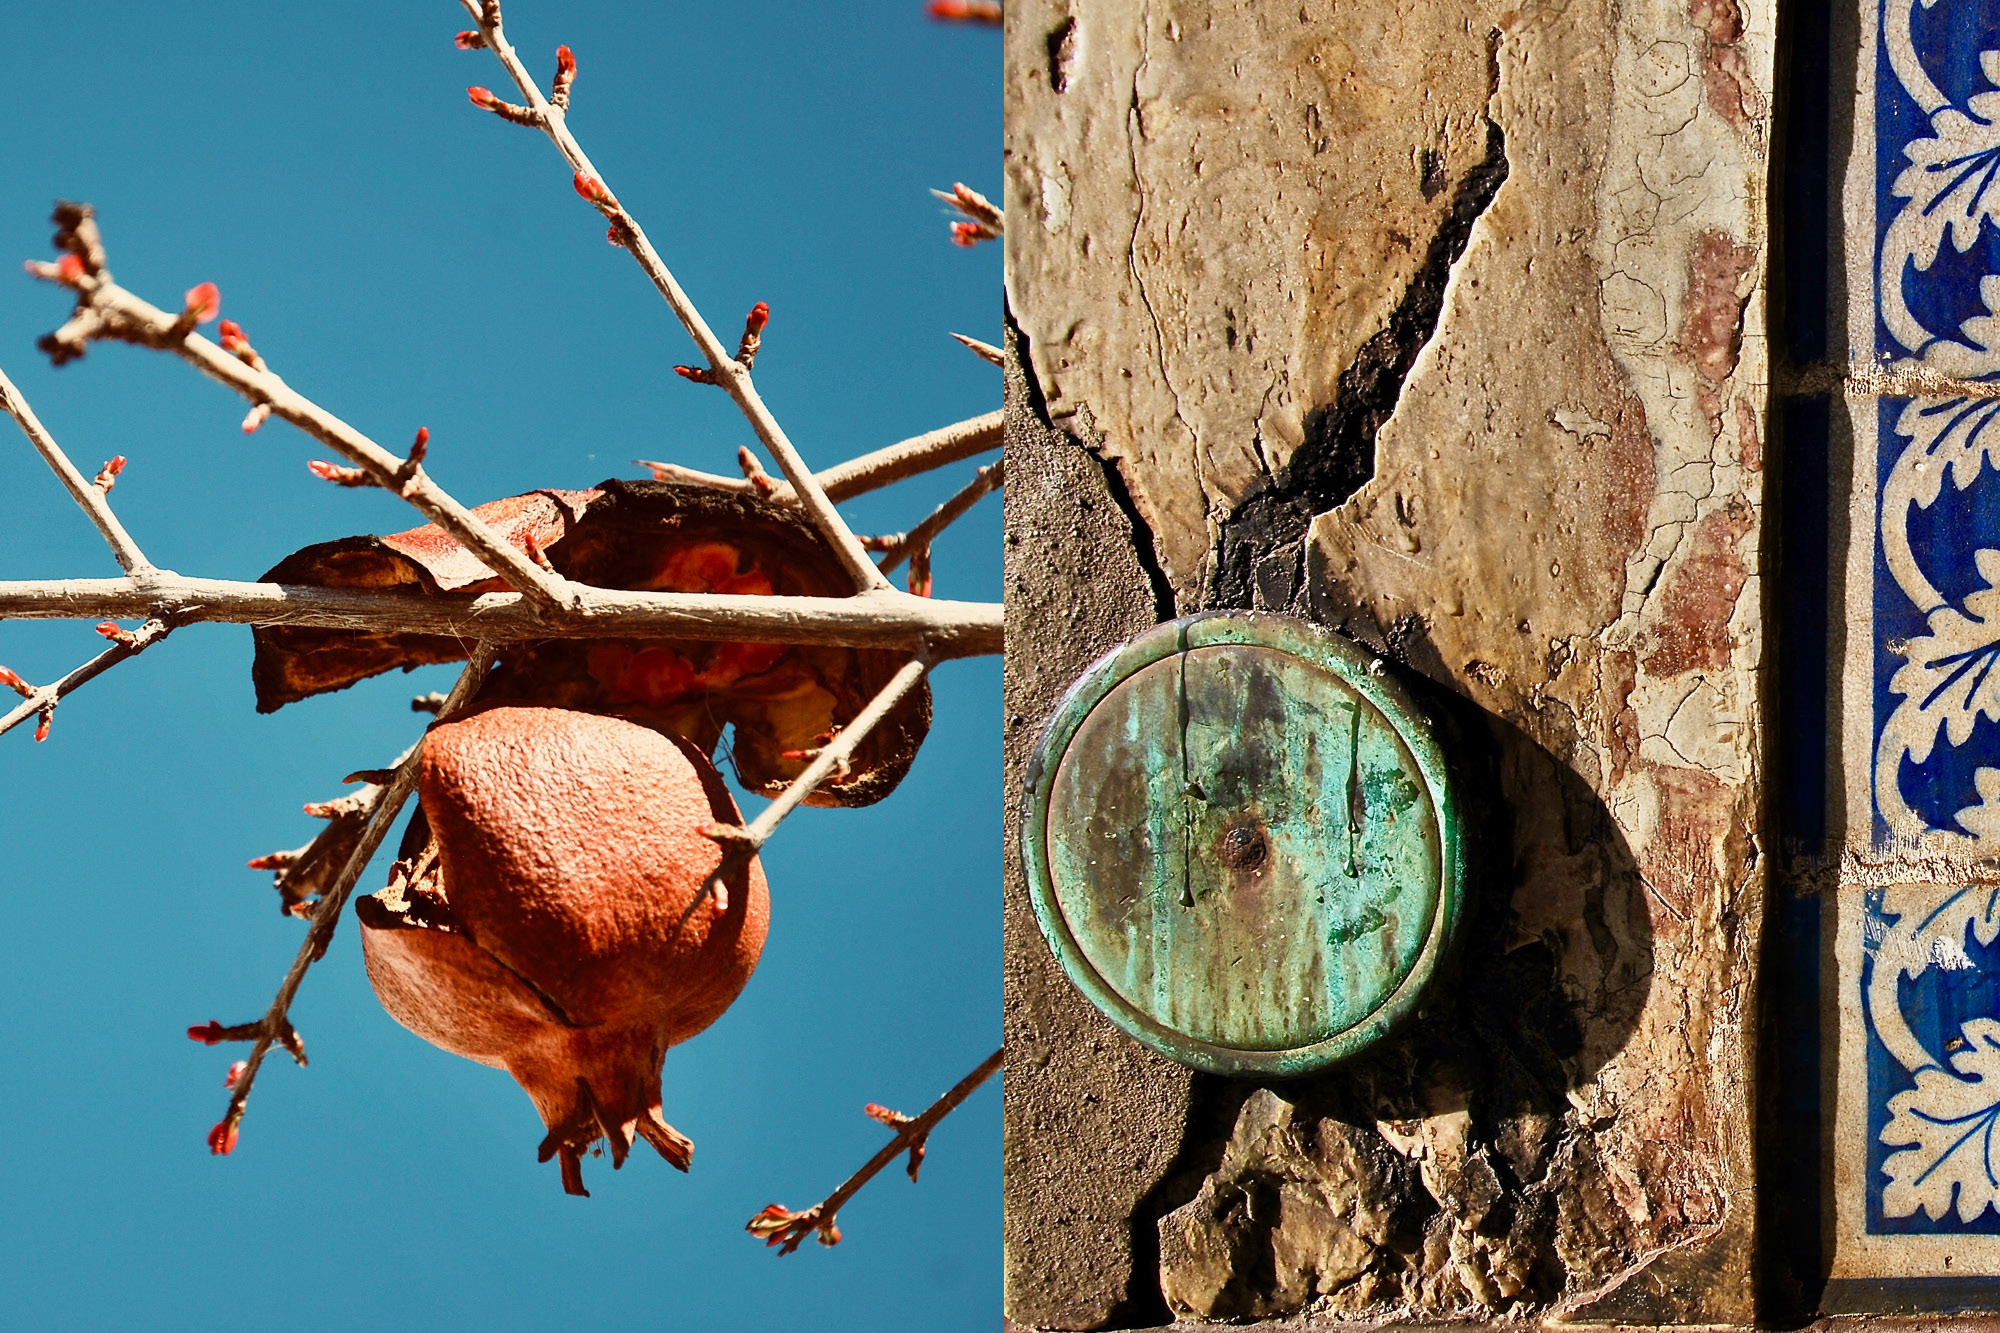 Two photos one showing a dried seed on a branch of a tree and the other a piece of aged wood with a circle-shaped piece of wood nailed on top of the board.